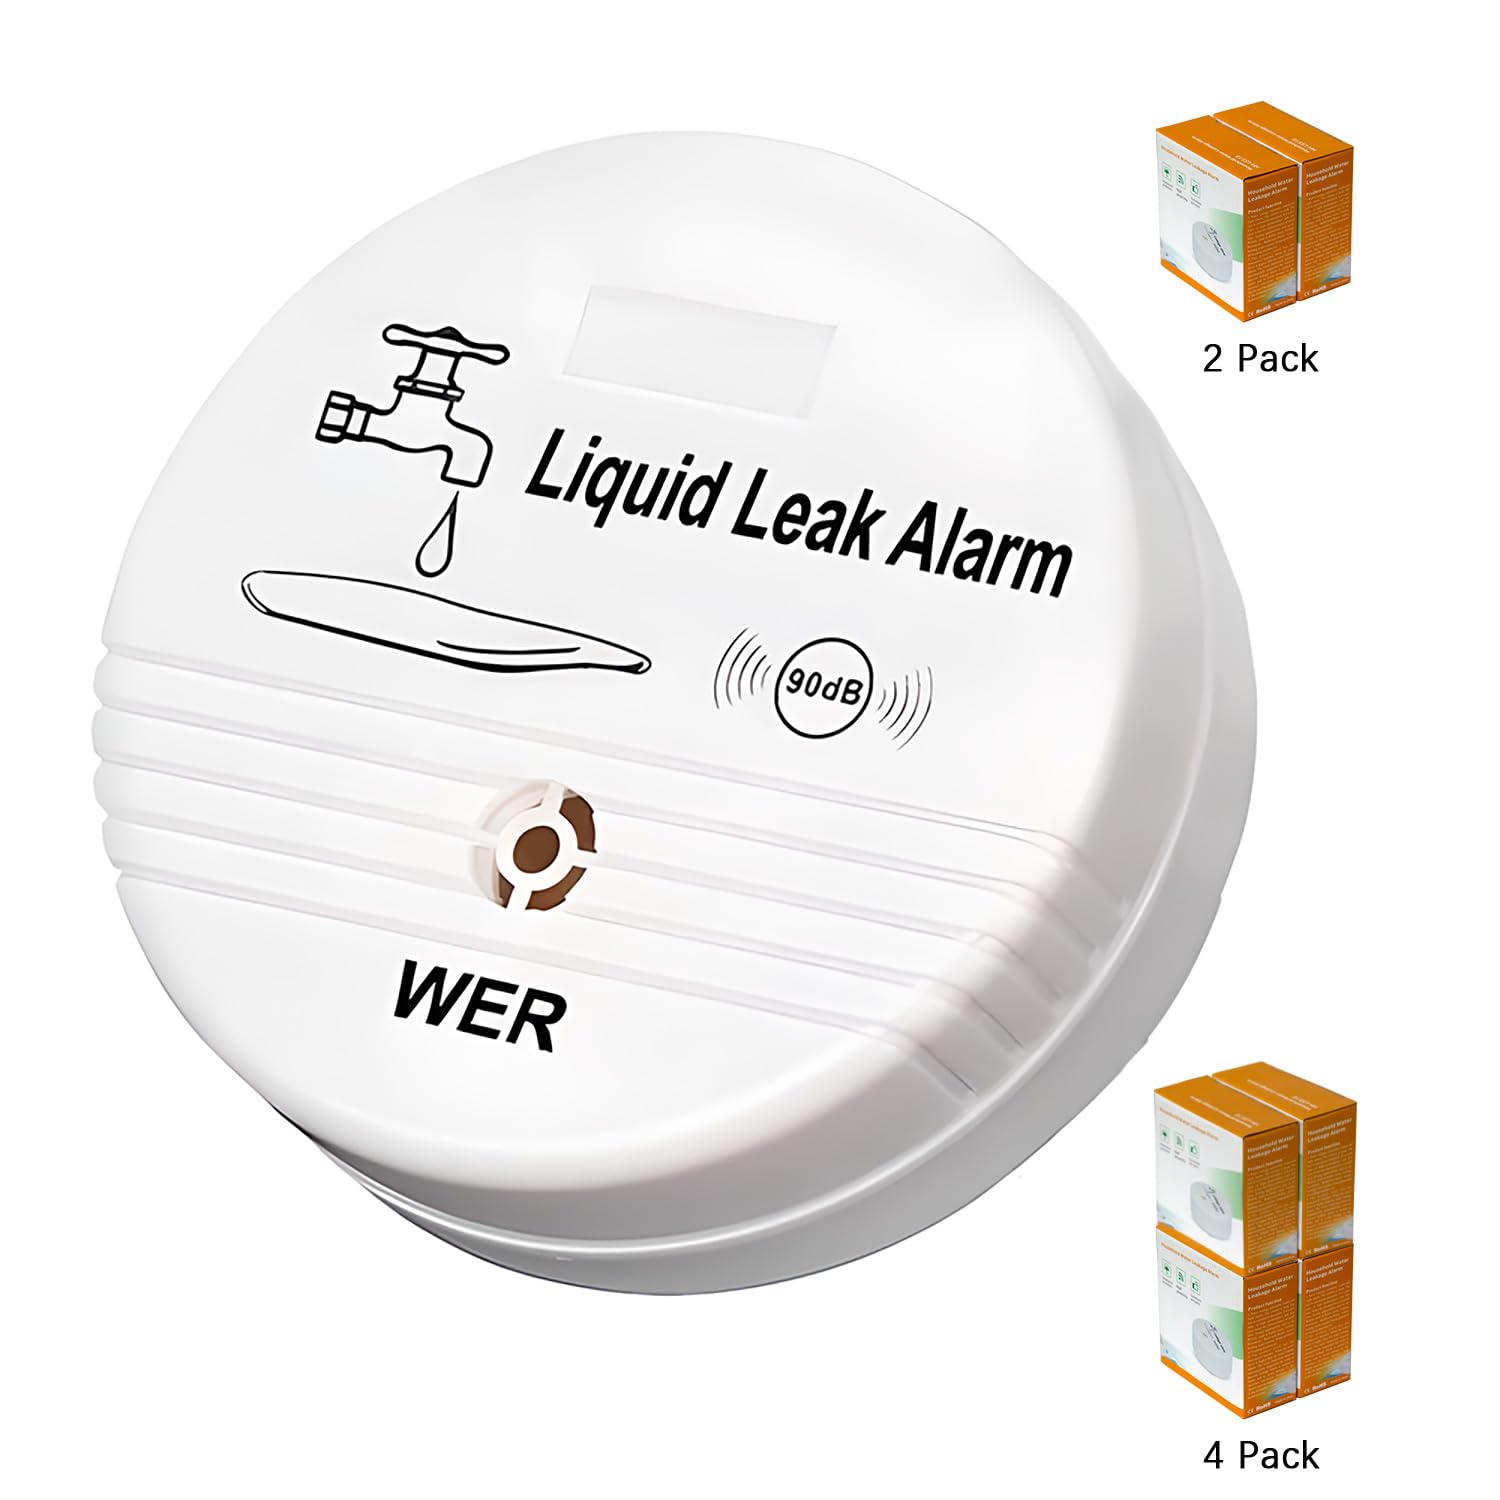 WER Water Leak Alarm Sensor, Battery Operated Leak Alert, 90dB Water Detector for Basements, Bathrooms, Laundry Rooms, Kitchens, Garages and All Office Areas (Shipped Without Battery, 4 Pack)